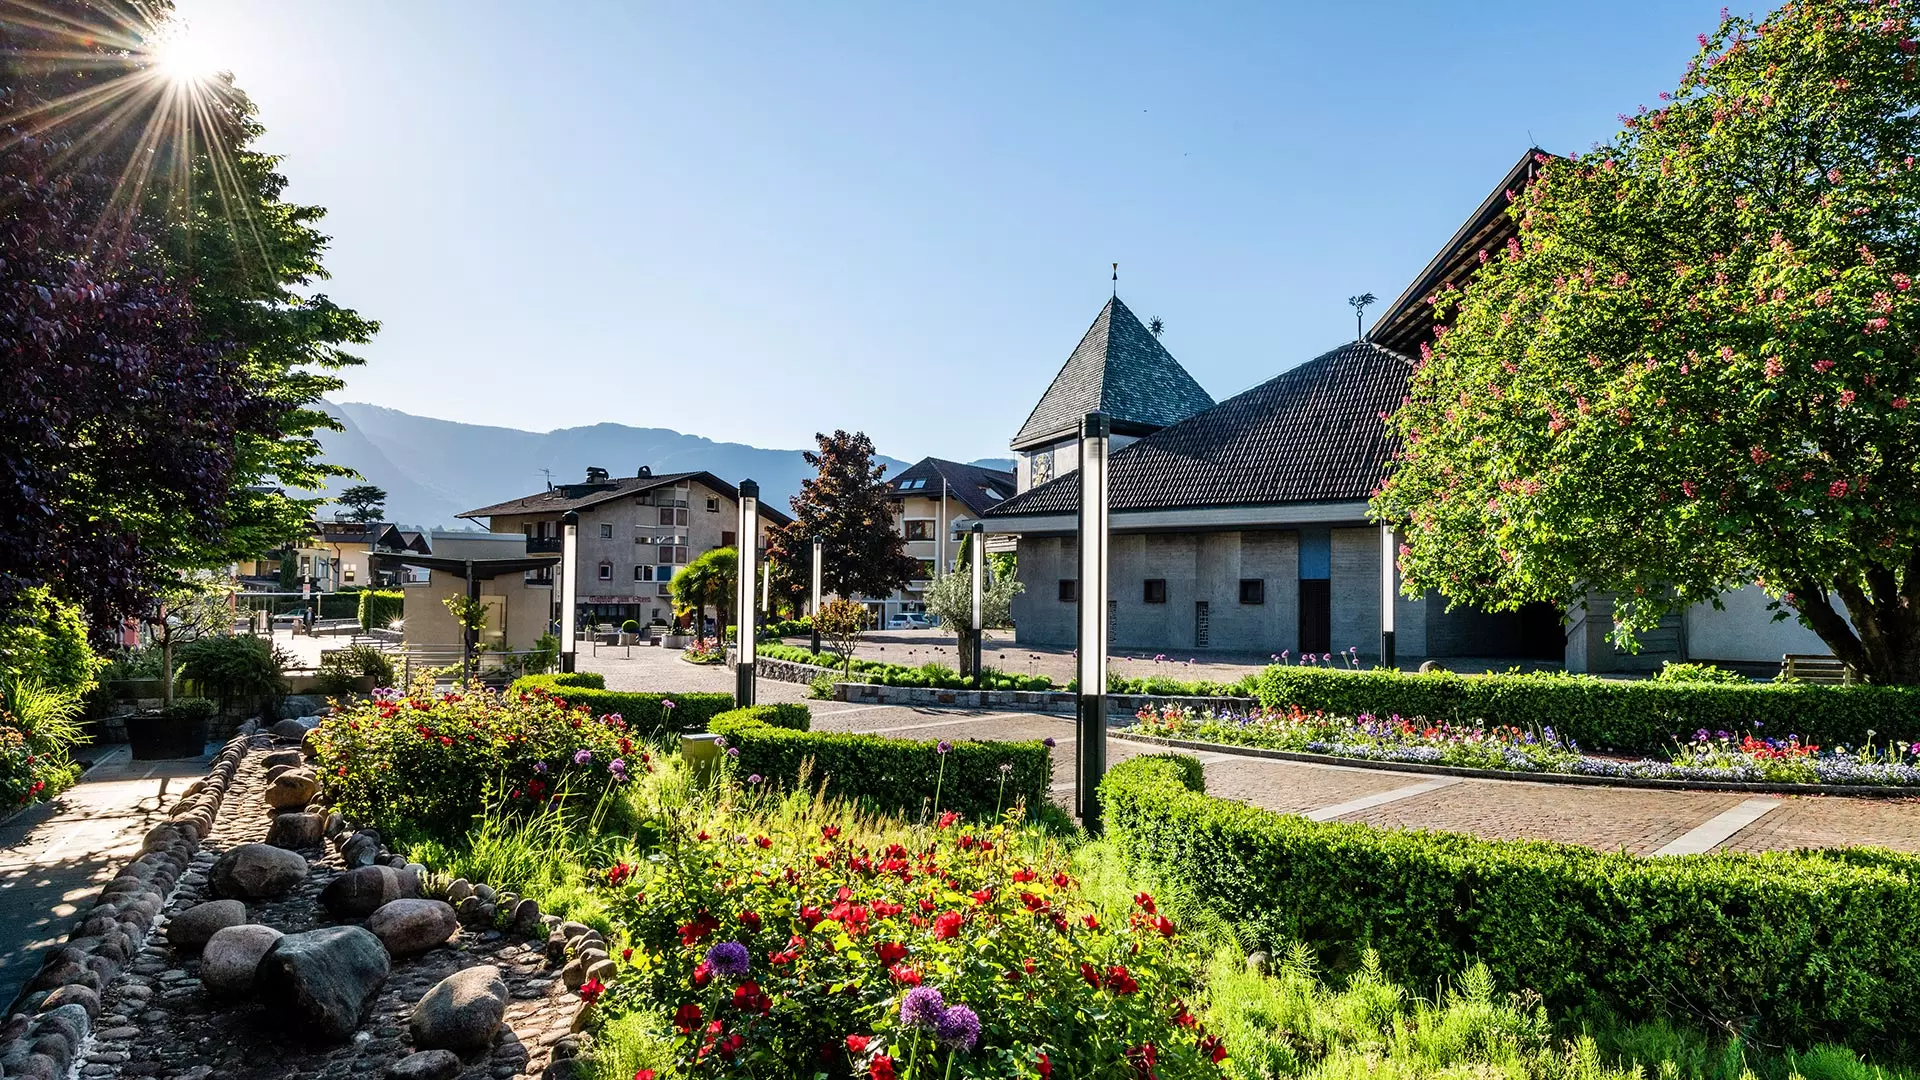 Visit the town center with its flowerbeds during your holidays in Algund